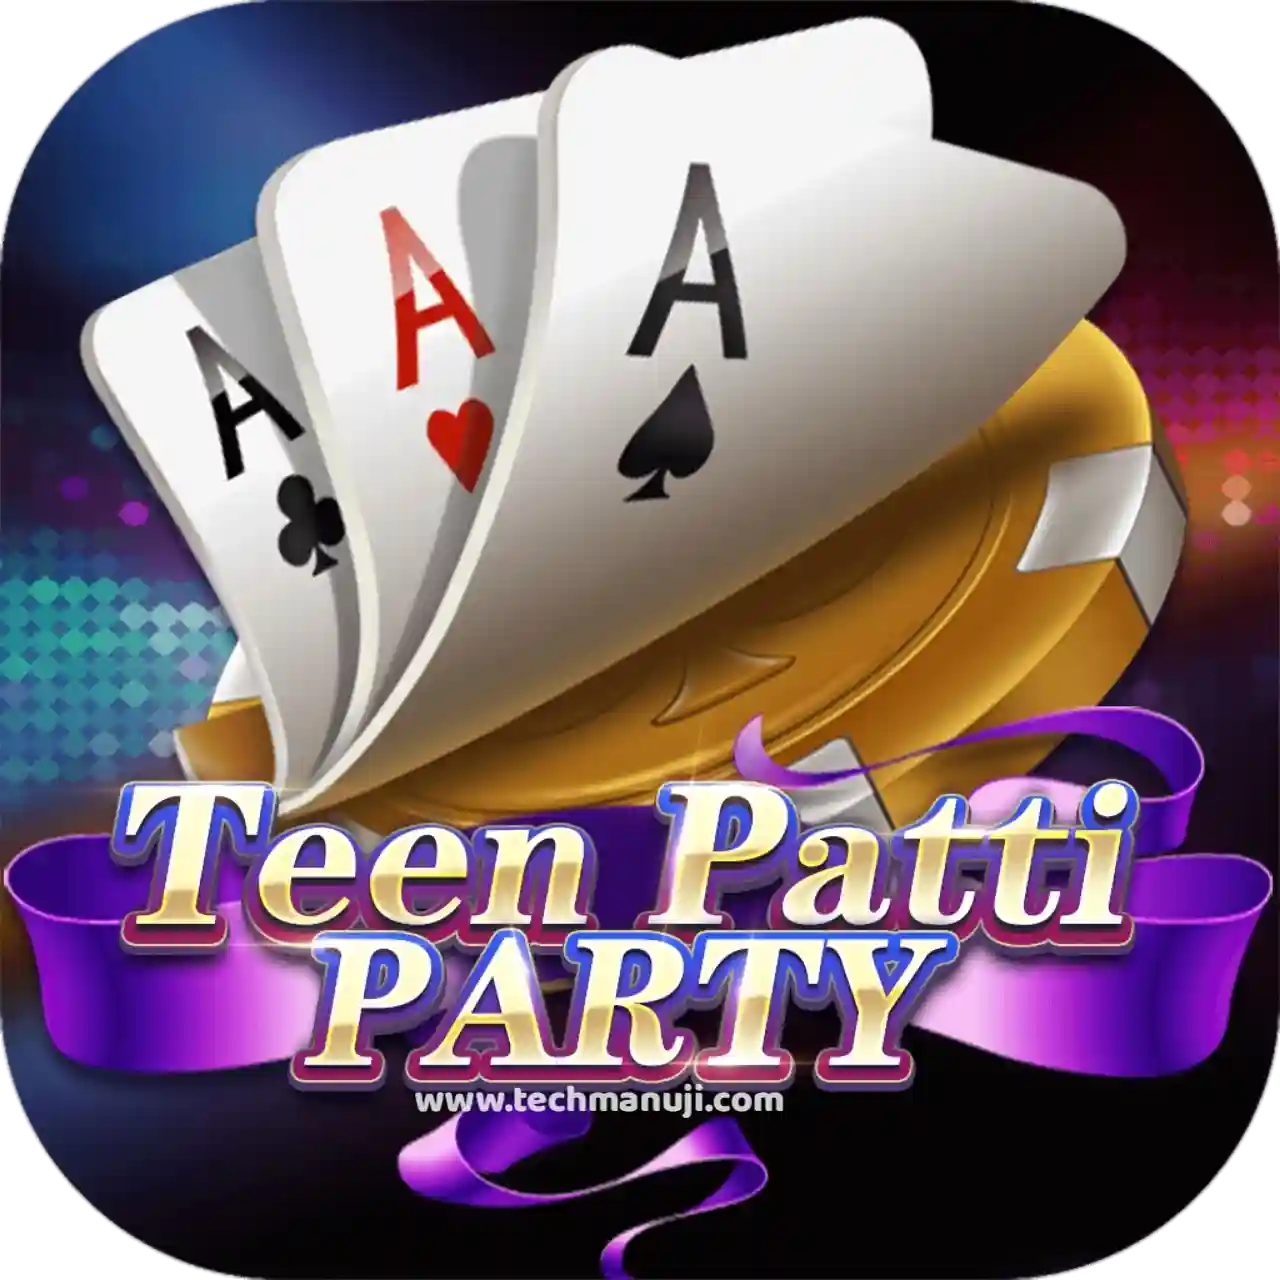 Teen Patti Party Apk Download - Teen Patti Yes Apk Download